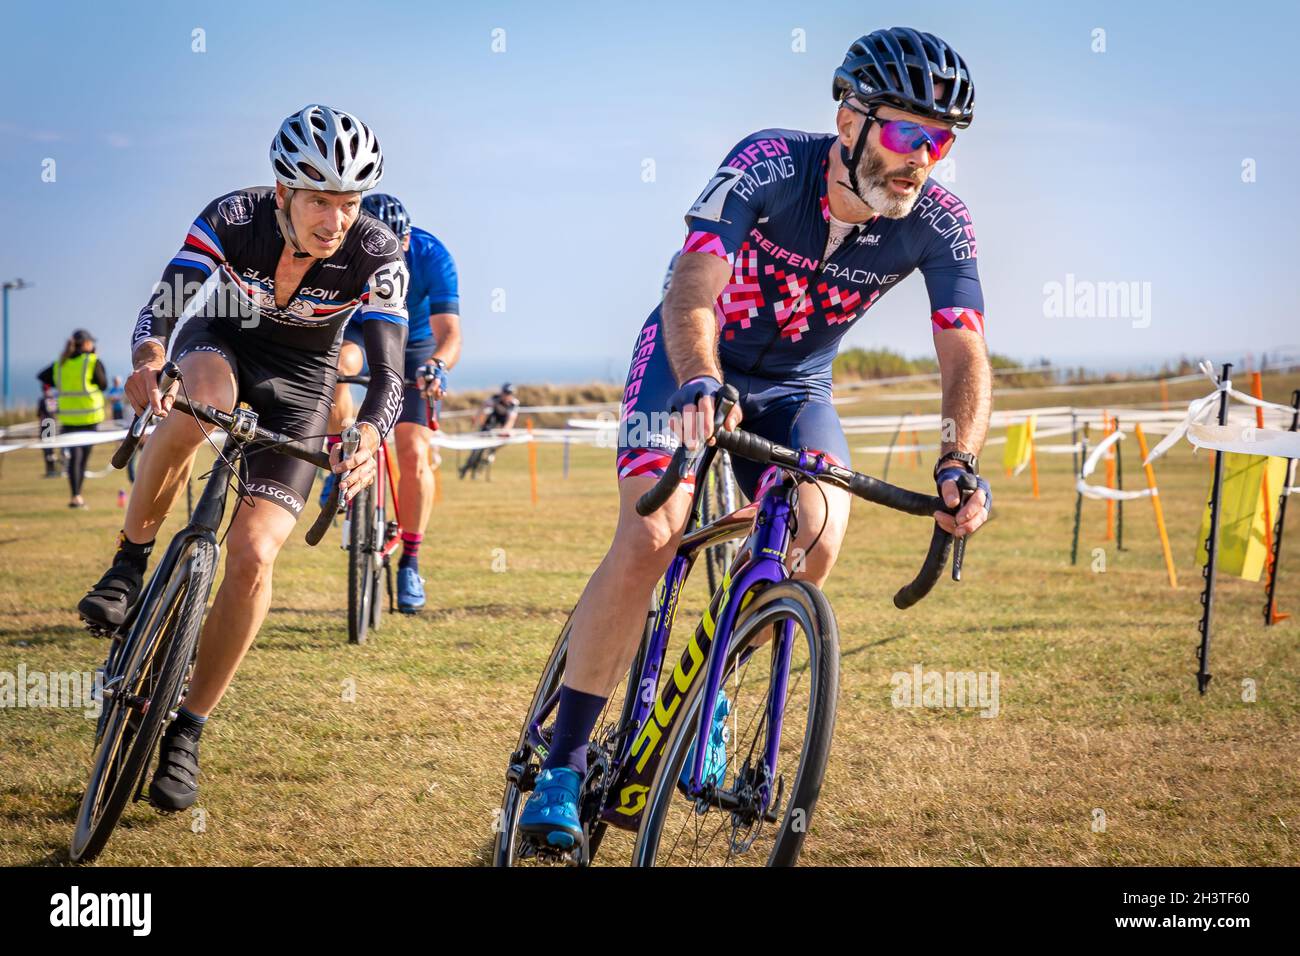 Course de cyclocross, South Shields, Tyne and Wear, Angleterre, Royaume-Uni,GB, Europe. Banque D'Images